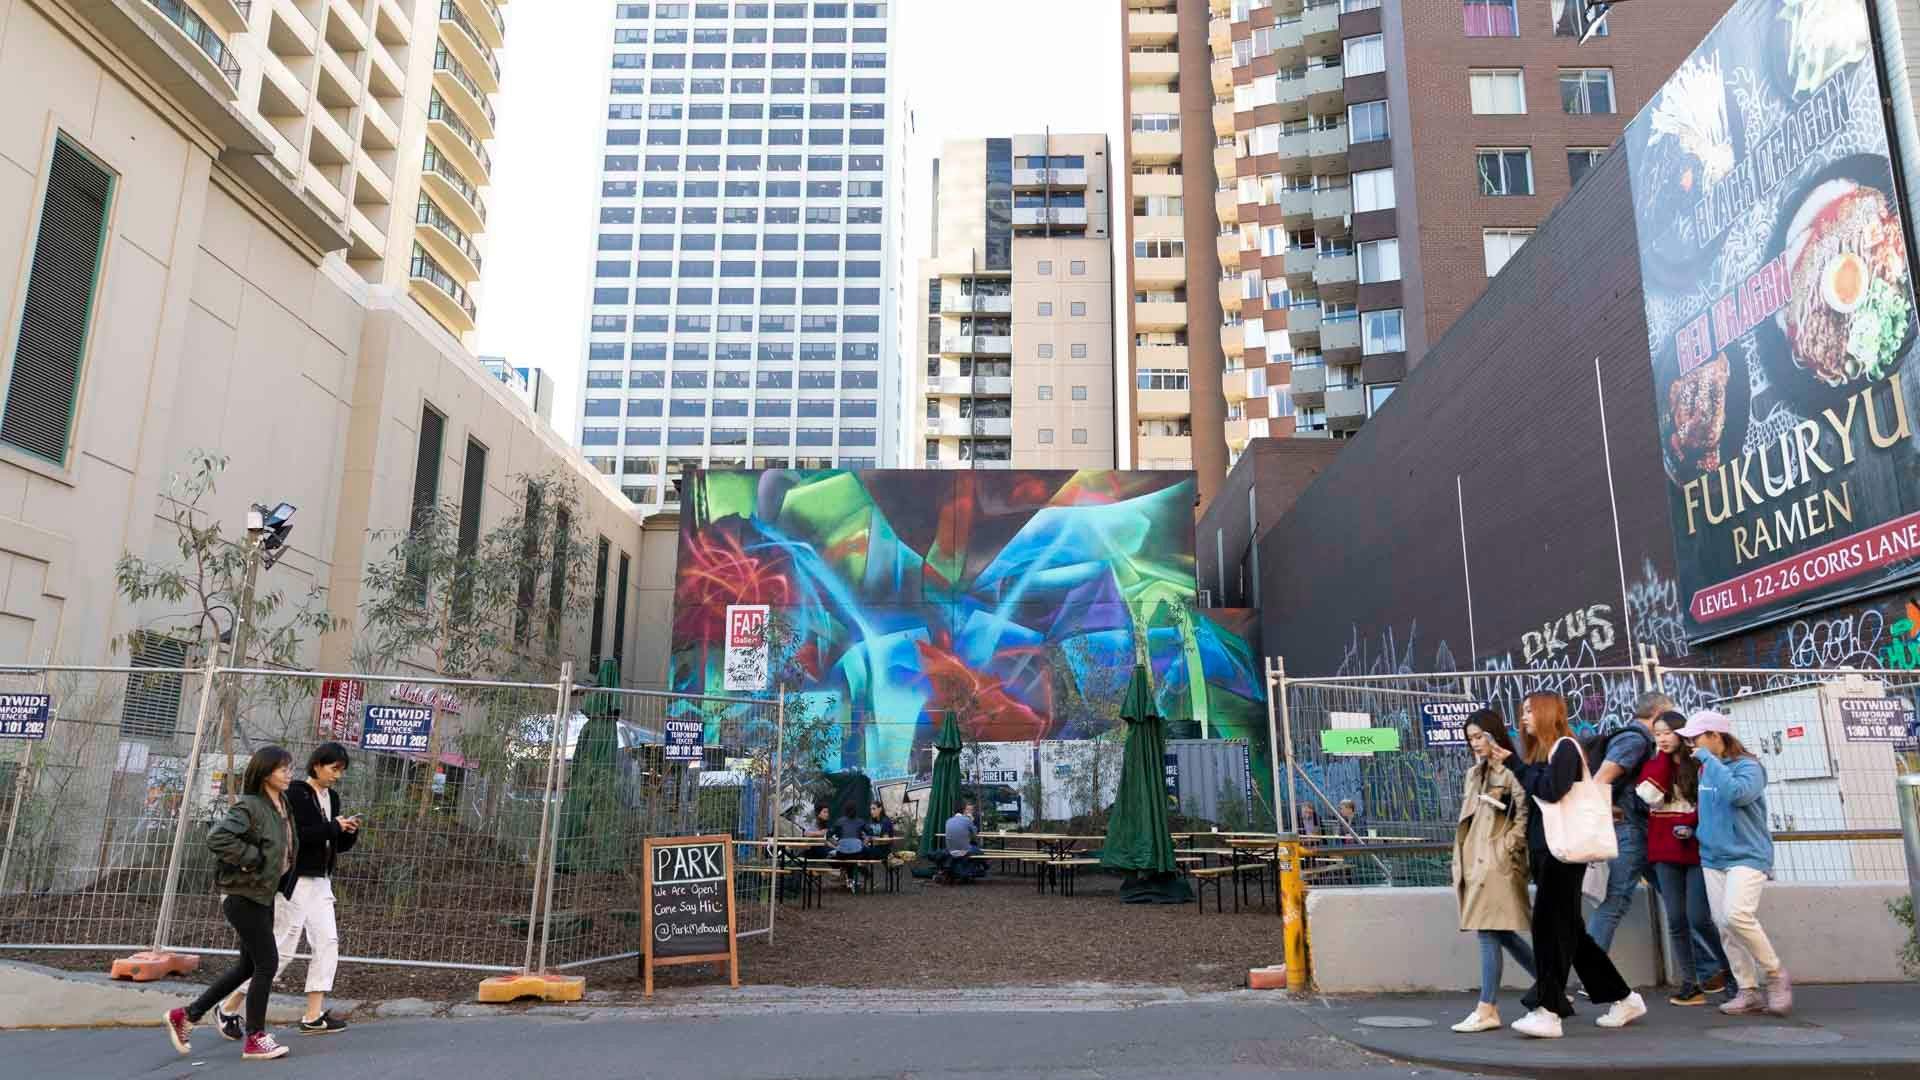 Park Melbourne Is the New Beer Garden and Arts Space in a Former Chinatown Car Park